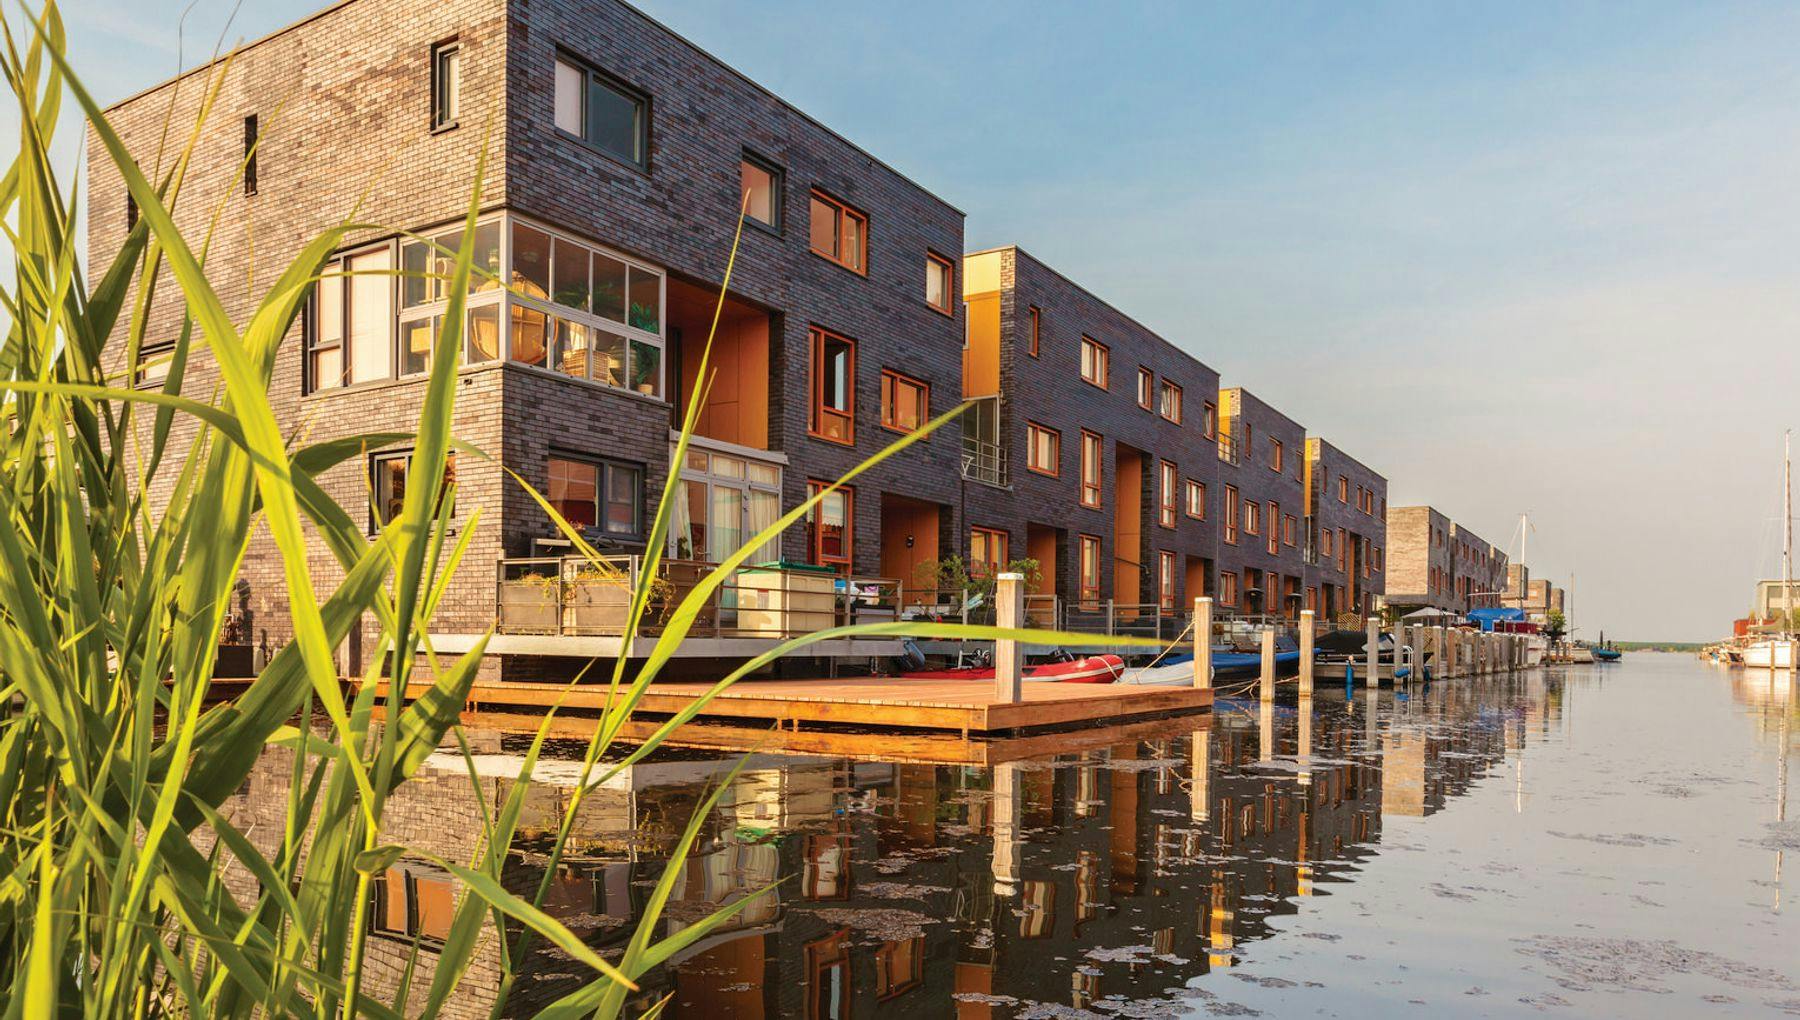 Row of Dutch modern canal houses in Almere reflected in the water